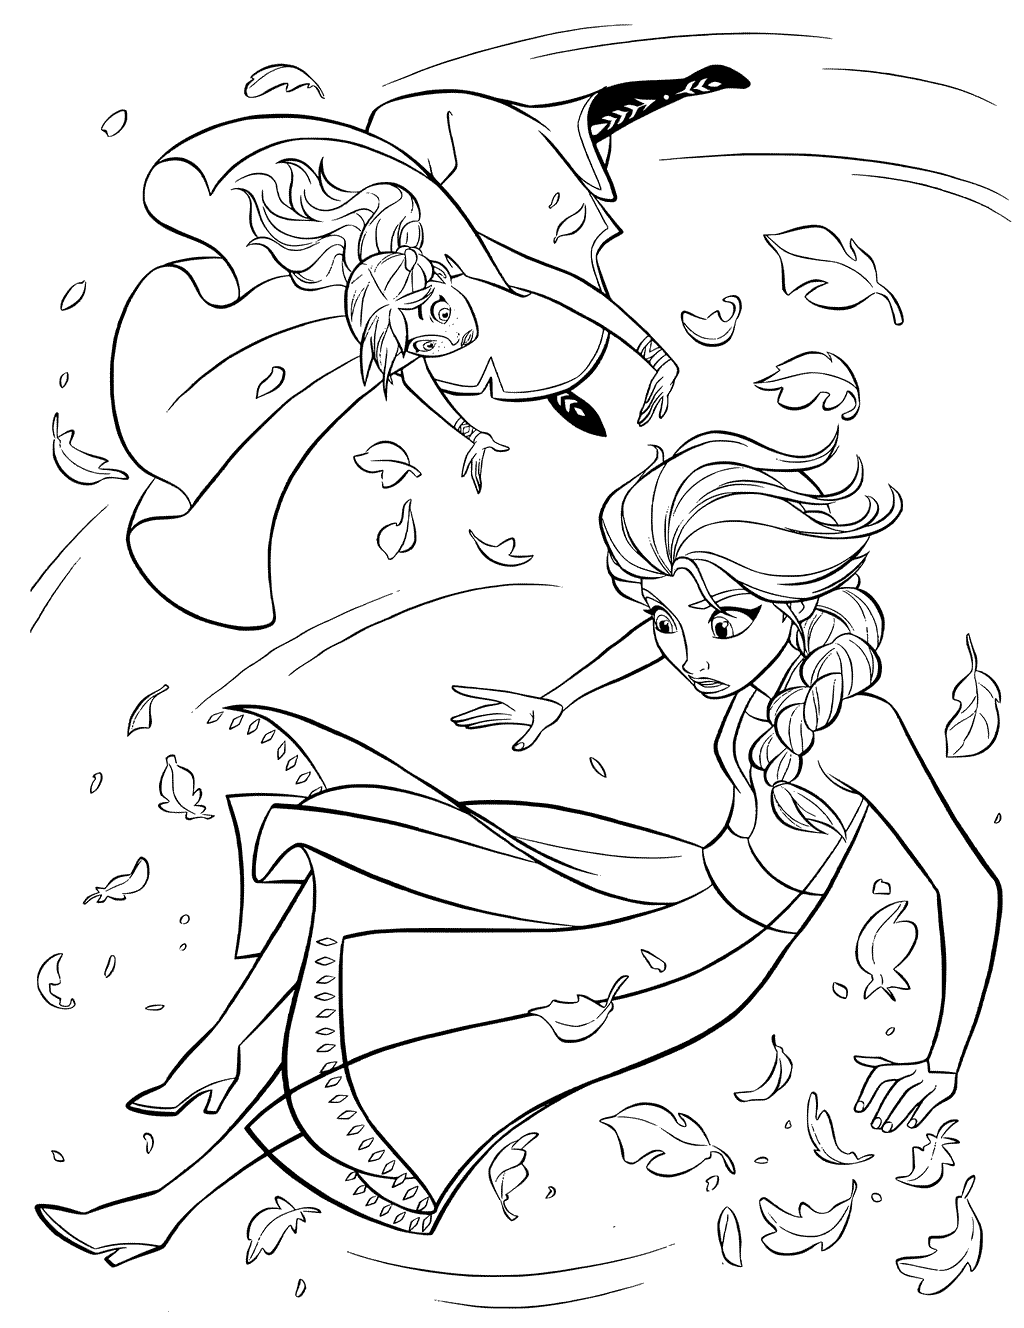 Frozen 2Anna And Elsa In Whirlwind Coloring Page